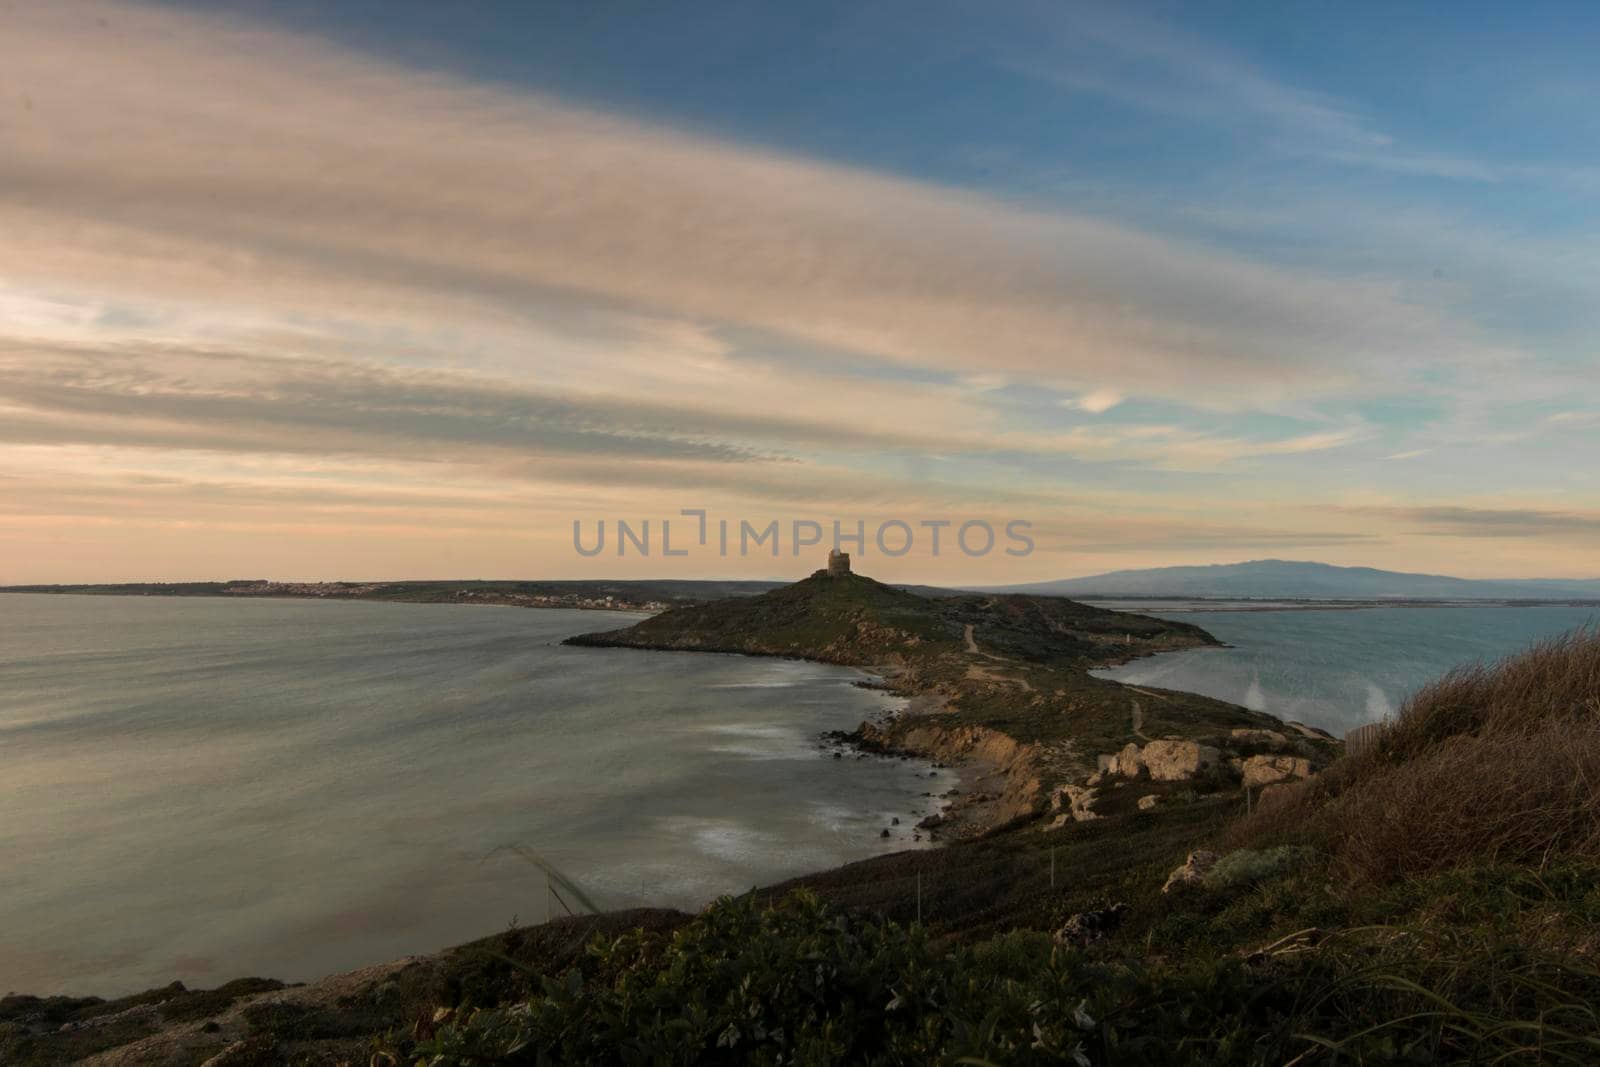 Landscape showing Cape San Marco among water in Sardegna island in Italy in a long exposure picture